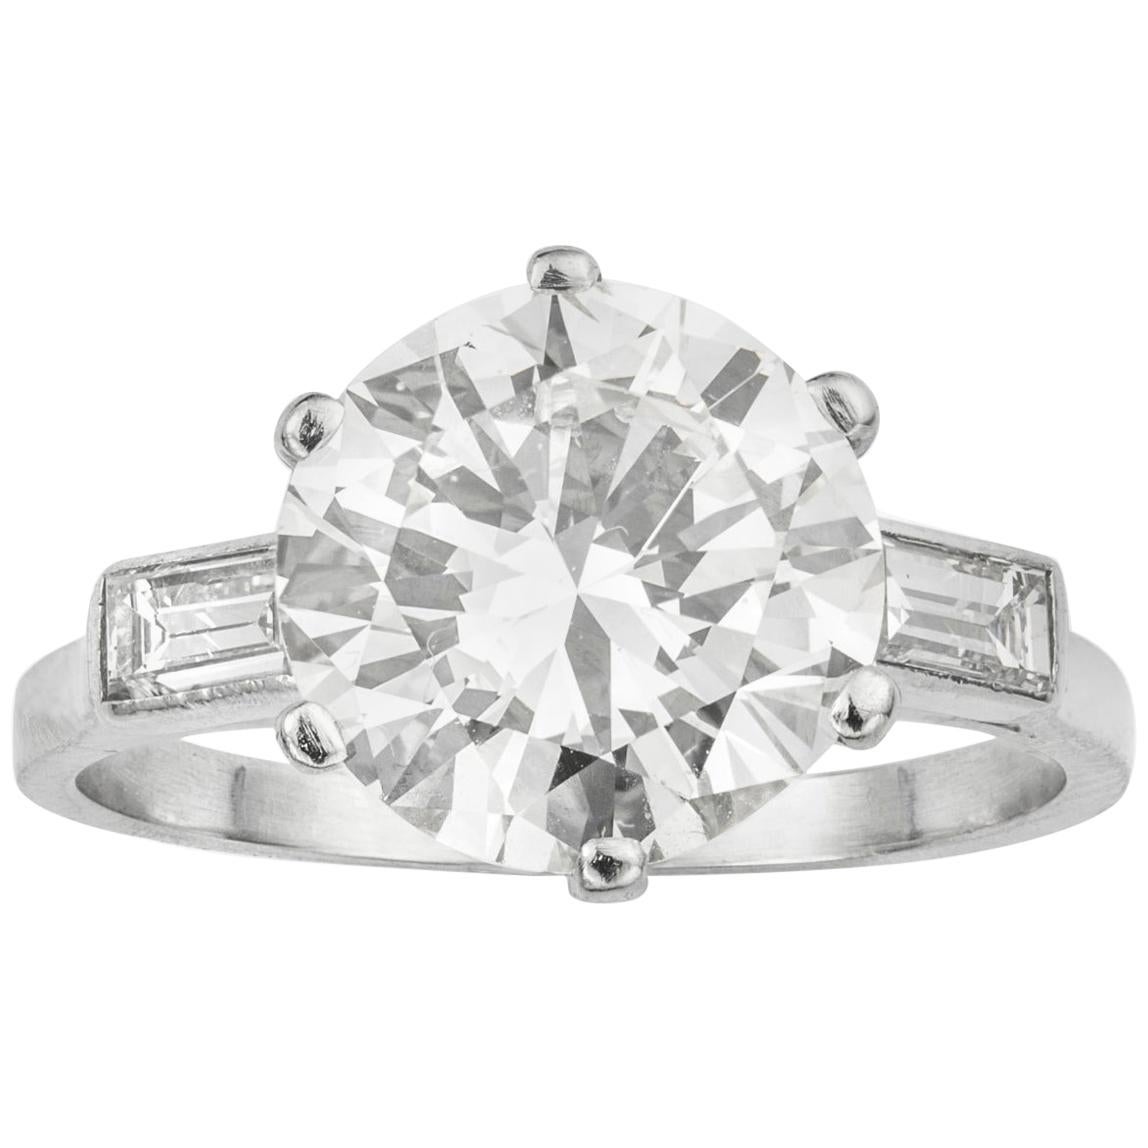 A Single Stone Solitaire Diamond Ring For Sale